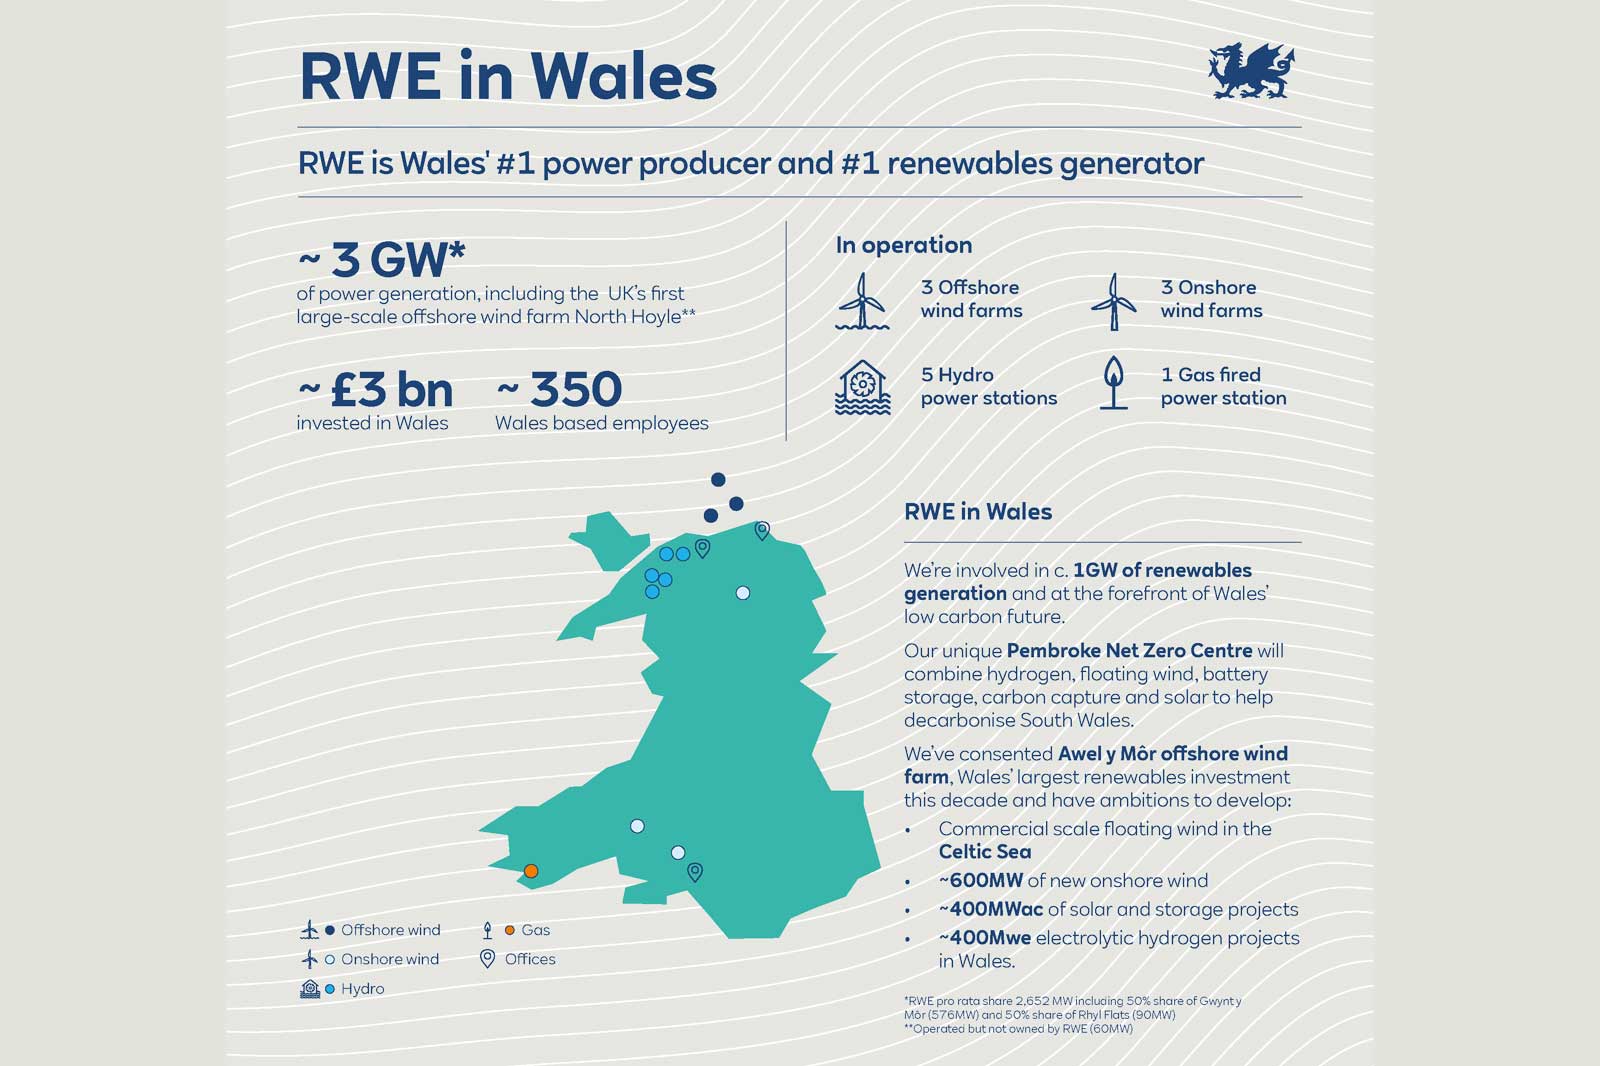 All locations and figures by RWE in Wales